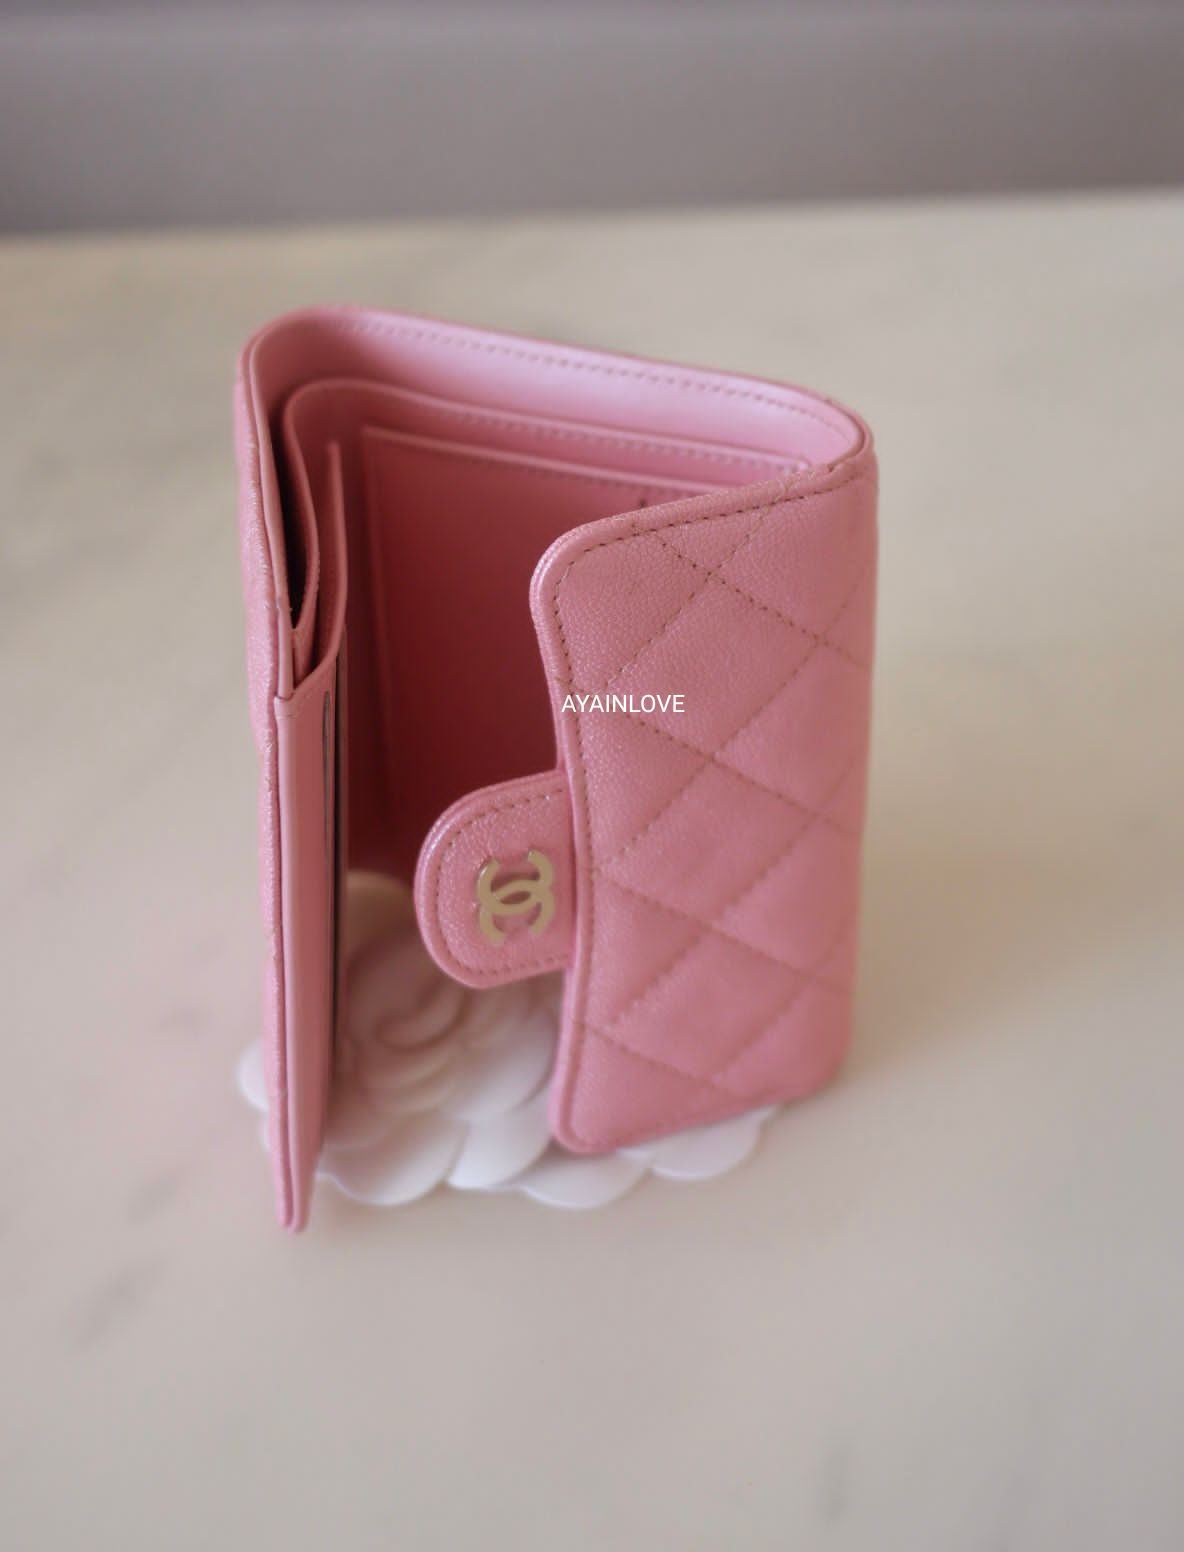 Chanel Pink Caviar Compact Wallet